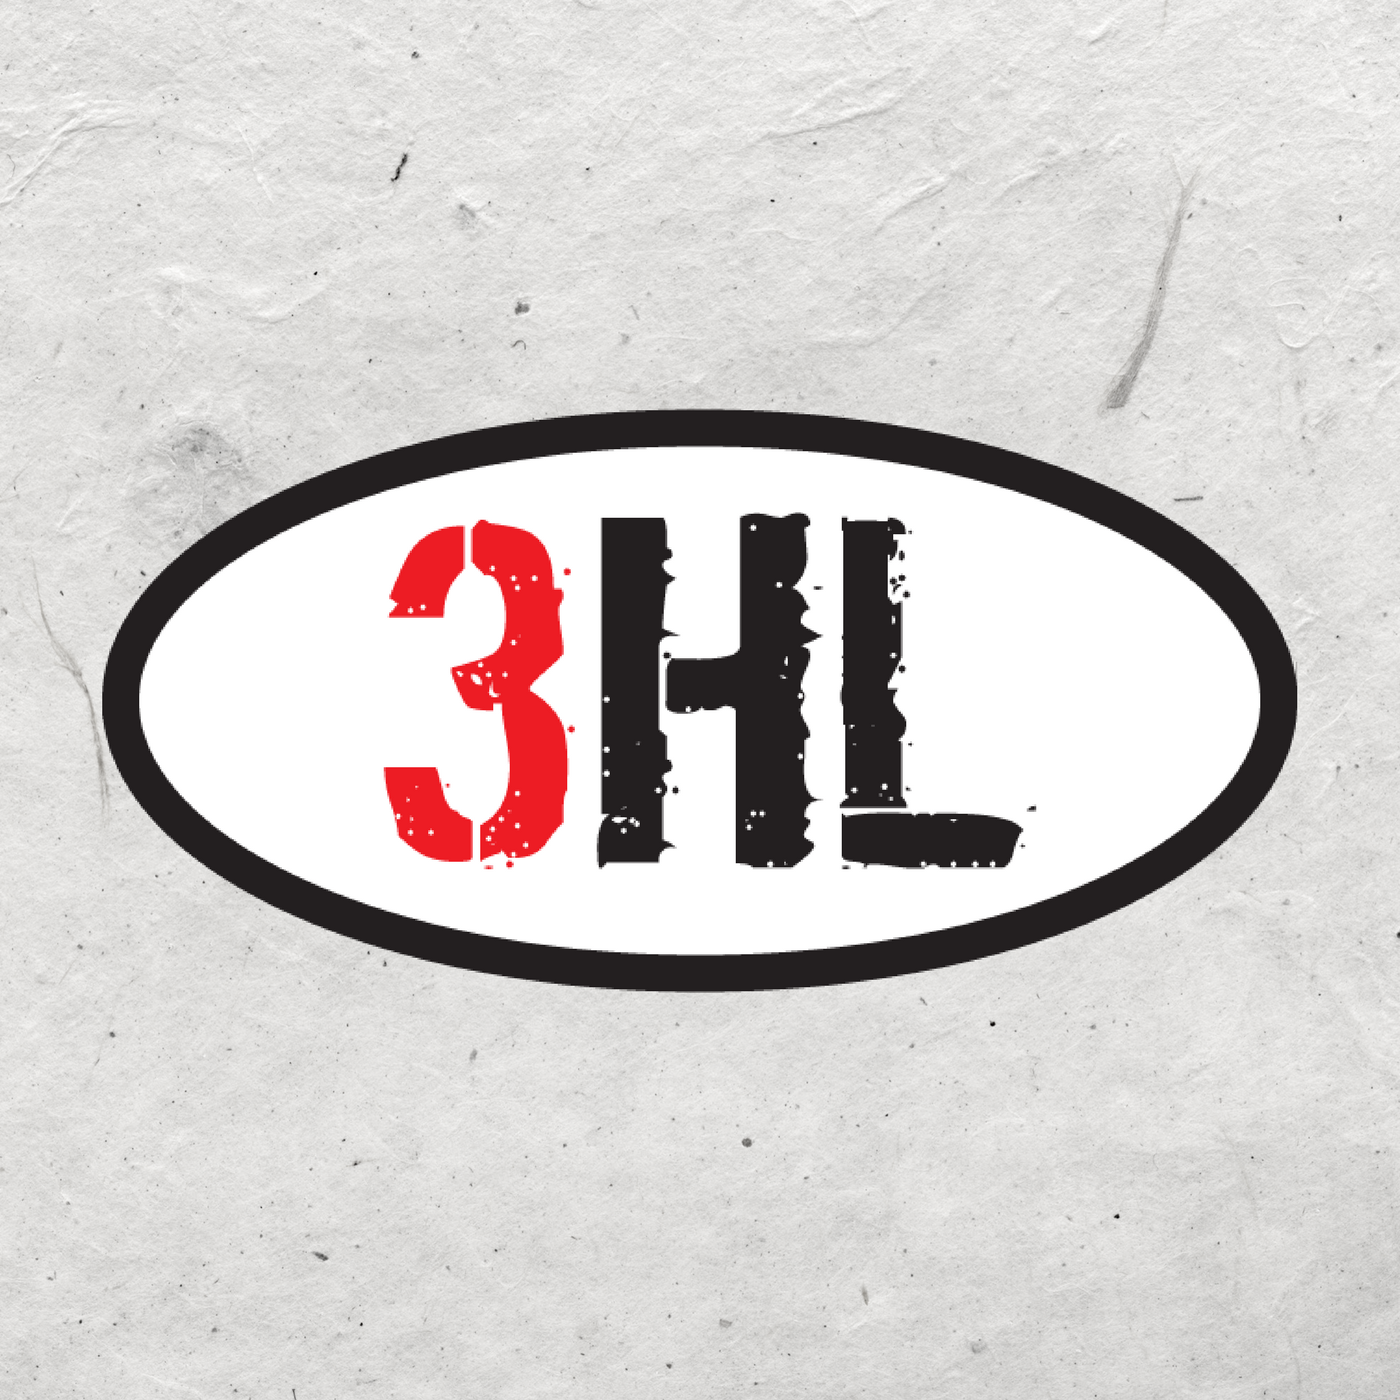 Greg Cosell on 3HL - The Chargers Should Have Taken JC Lathem